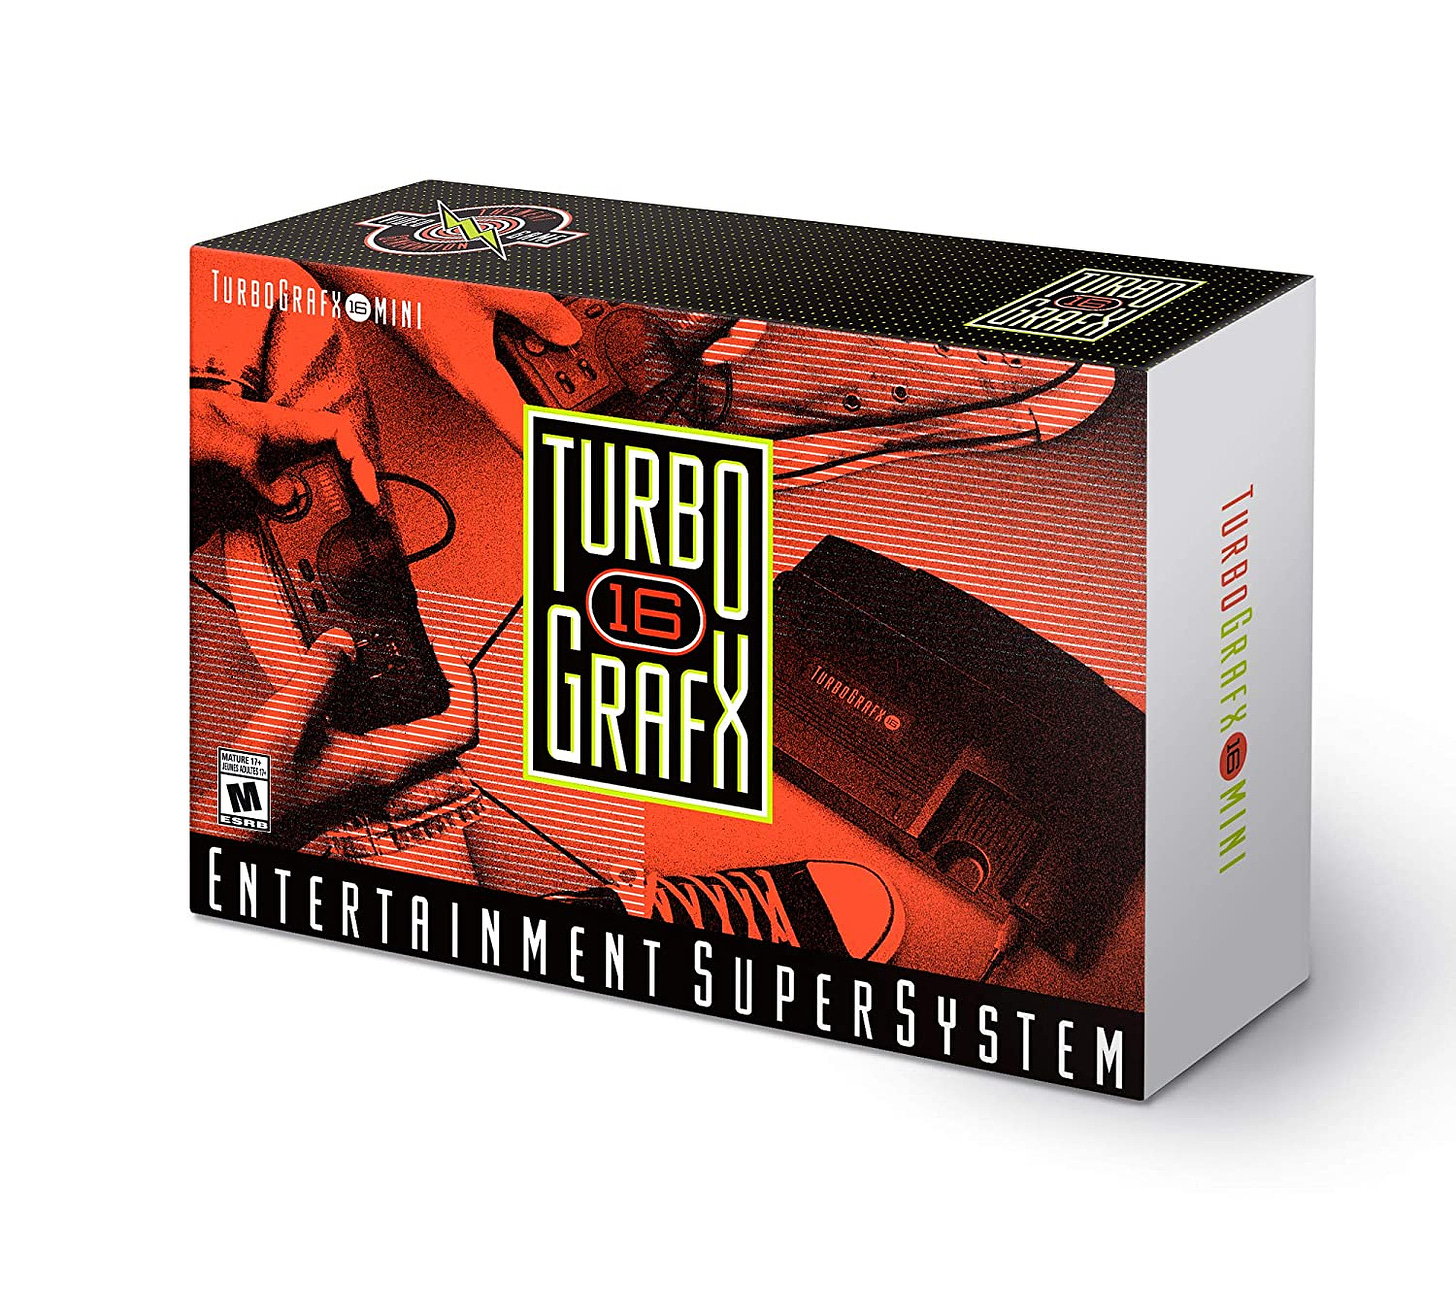 A promotional image for the Turbografx-16 Mini box